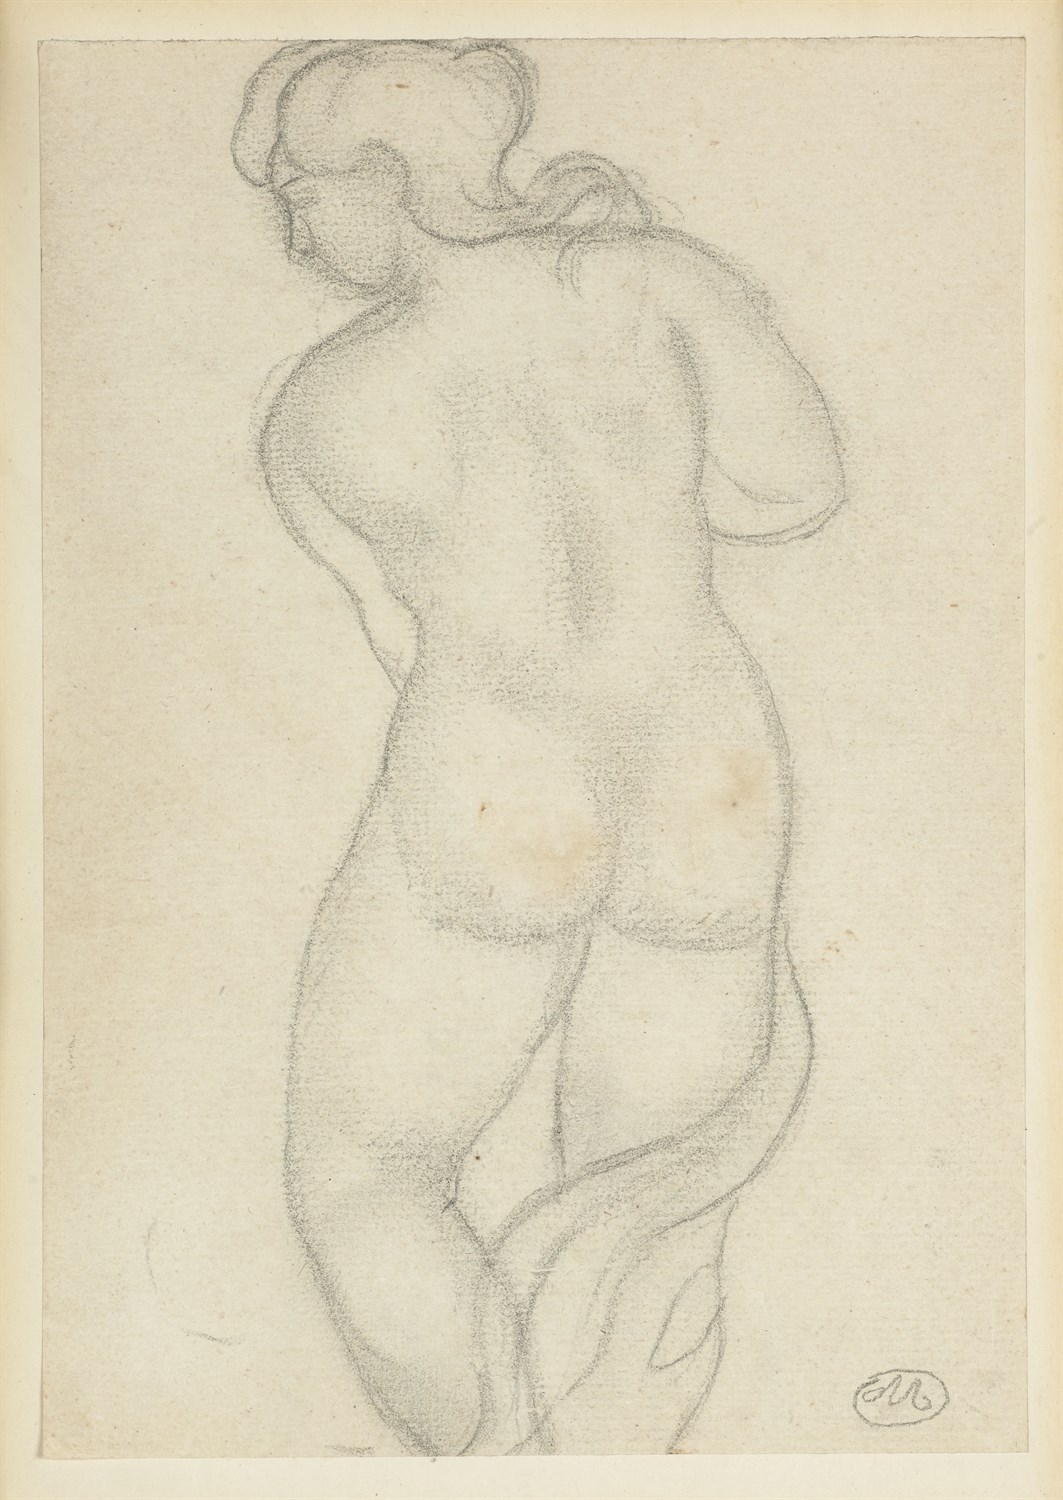 Lot 114 - ARISTIDE MAILLOL (FRENCH 1861-1944)